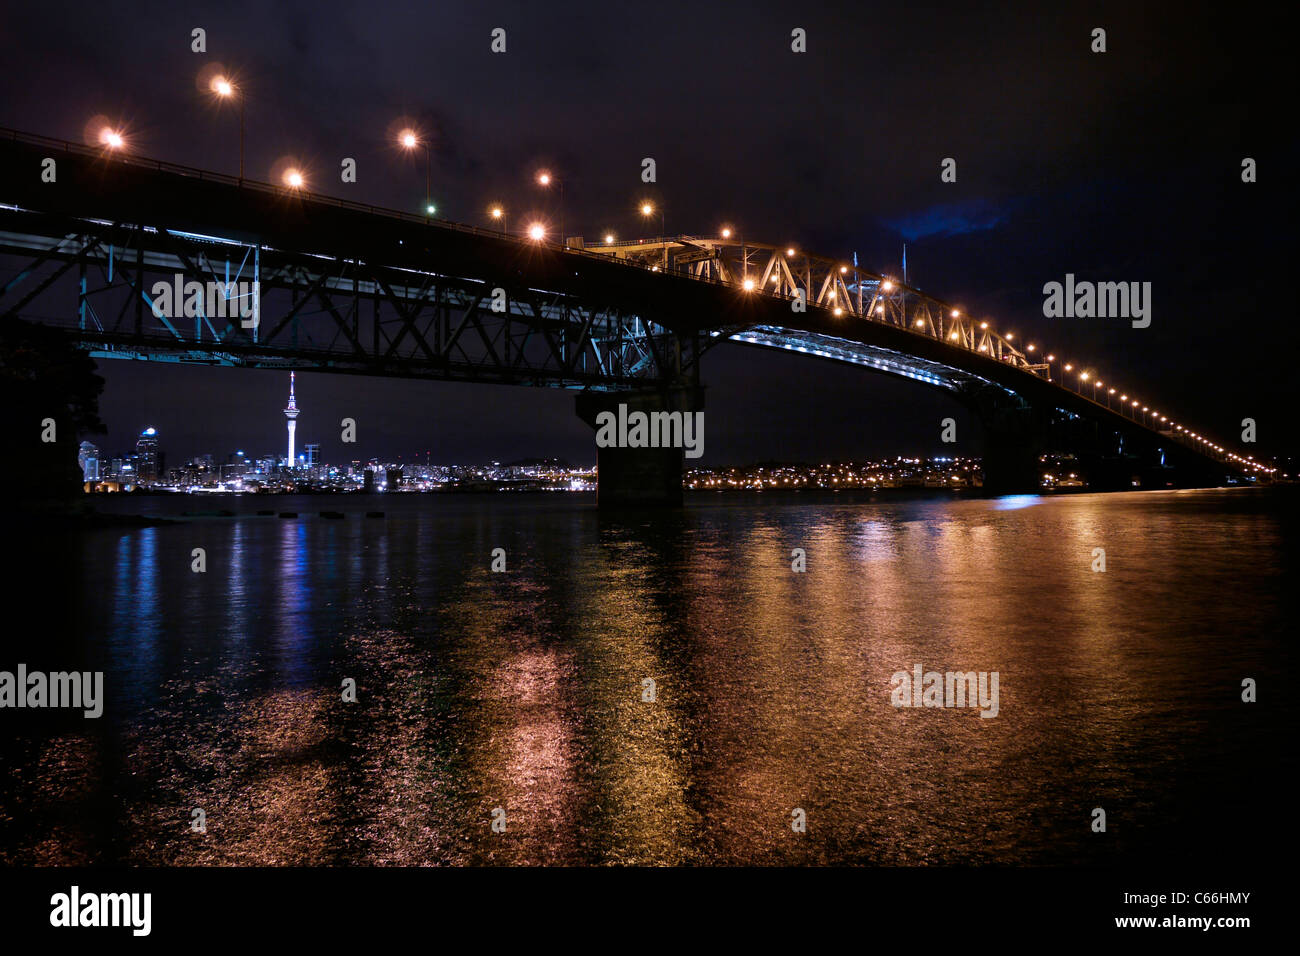 Looking at Auckland city from the North Shore at night with the Harbour Bridge in foreground Stock Photo